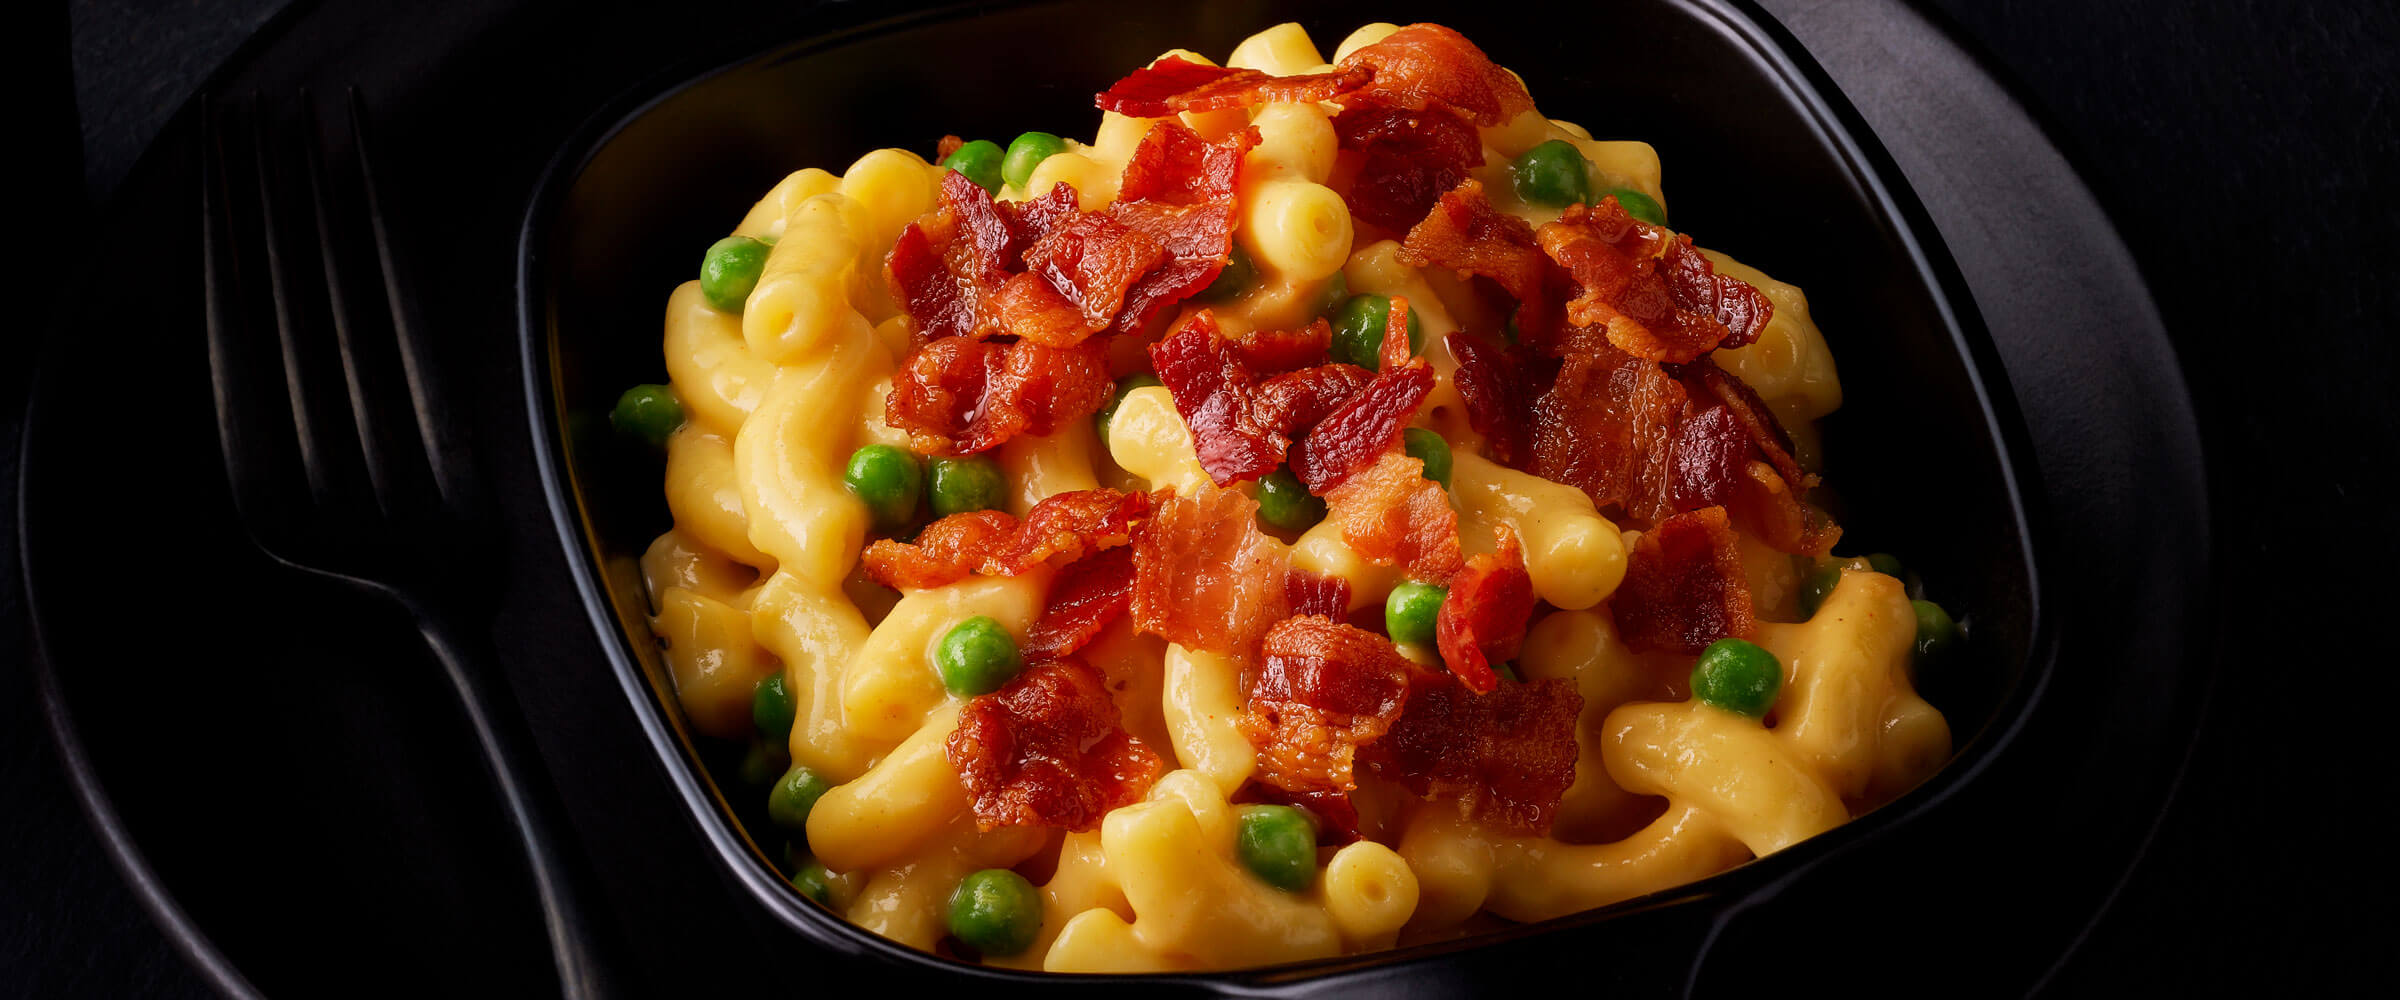 Bacon, Macaroni and Cheese, and Peas in black dish with fork